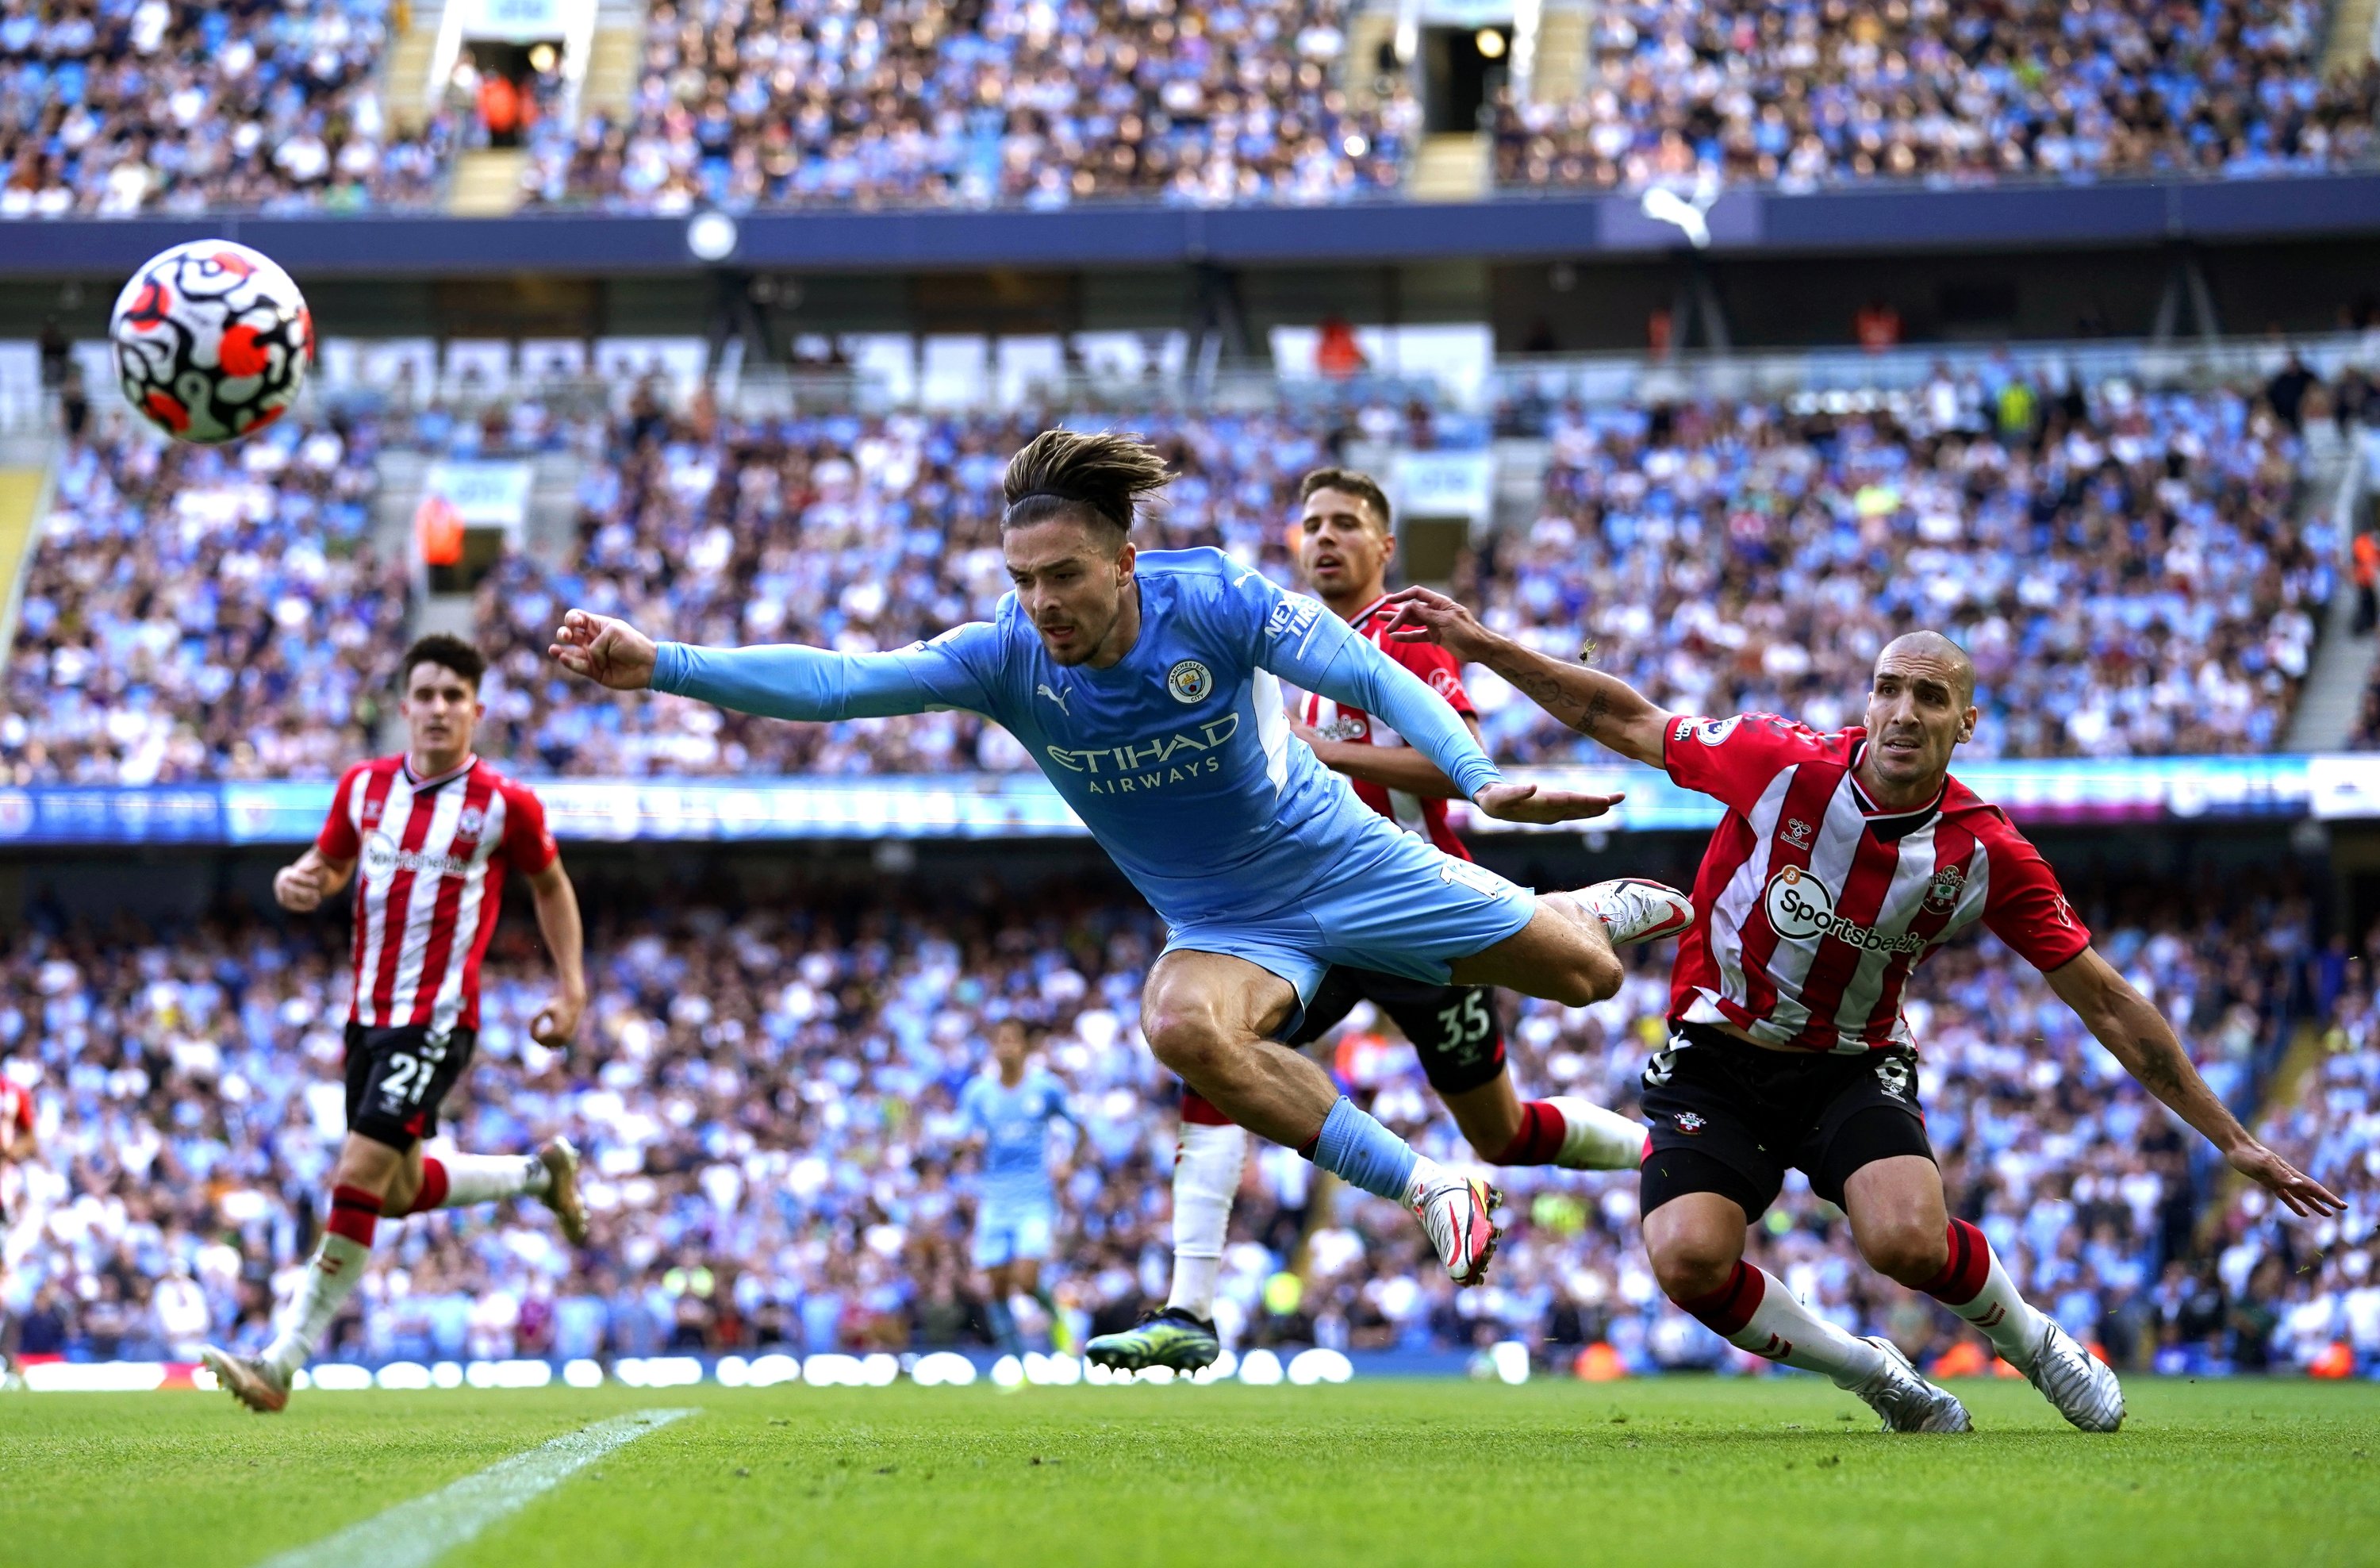 Manchester City's Jack Grealish (C) in action against Southampton's James Ward-Prowse (R) during a Premier League match in Manchester, England, Sept. 18, 2021. (EPA Photo)